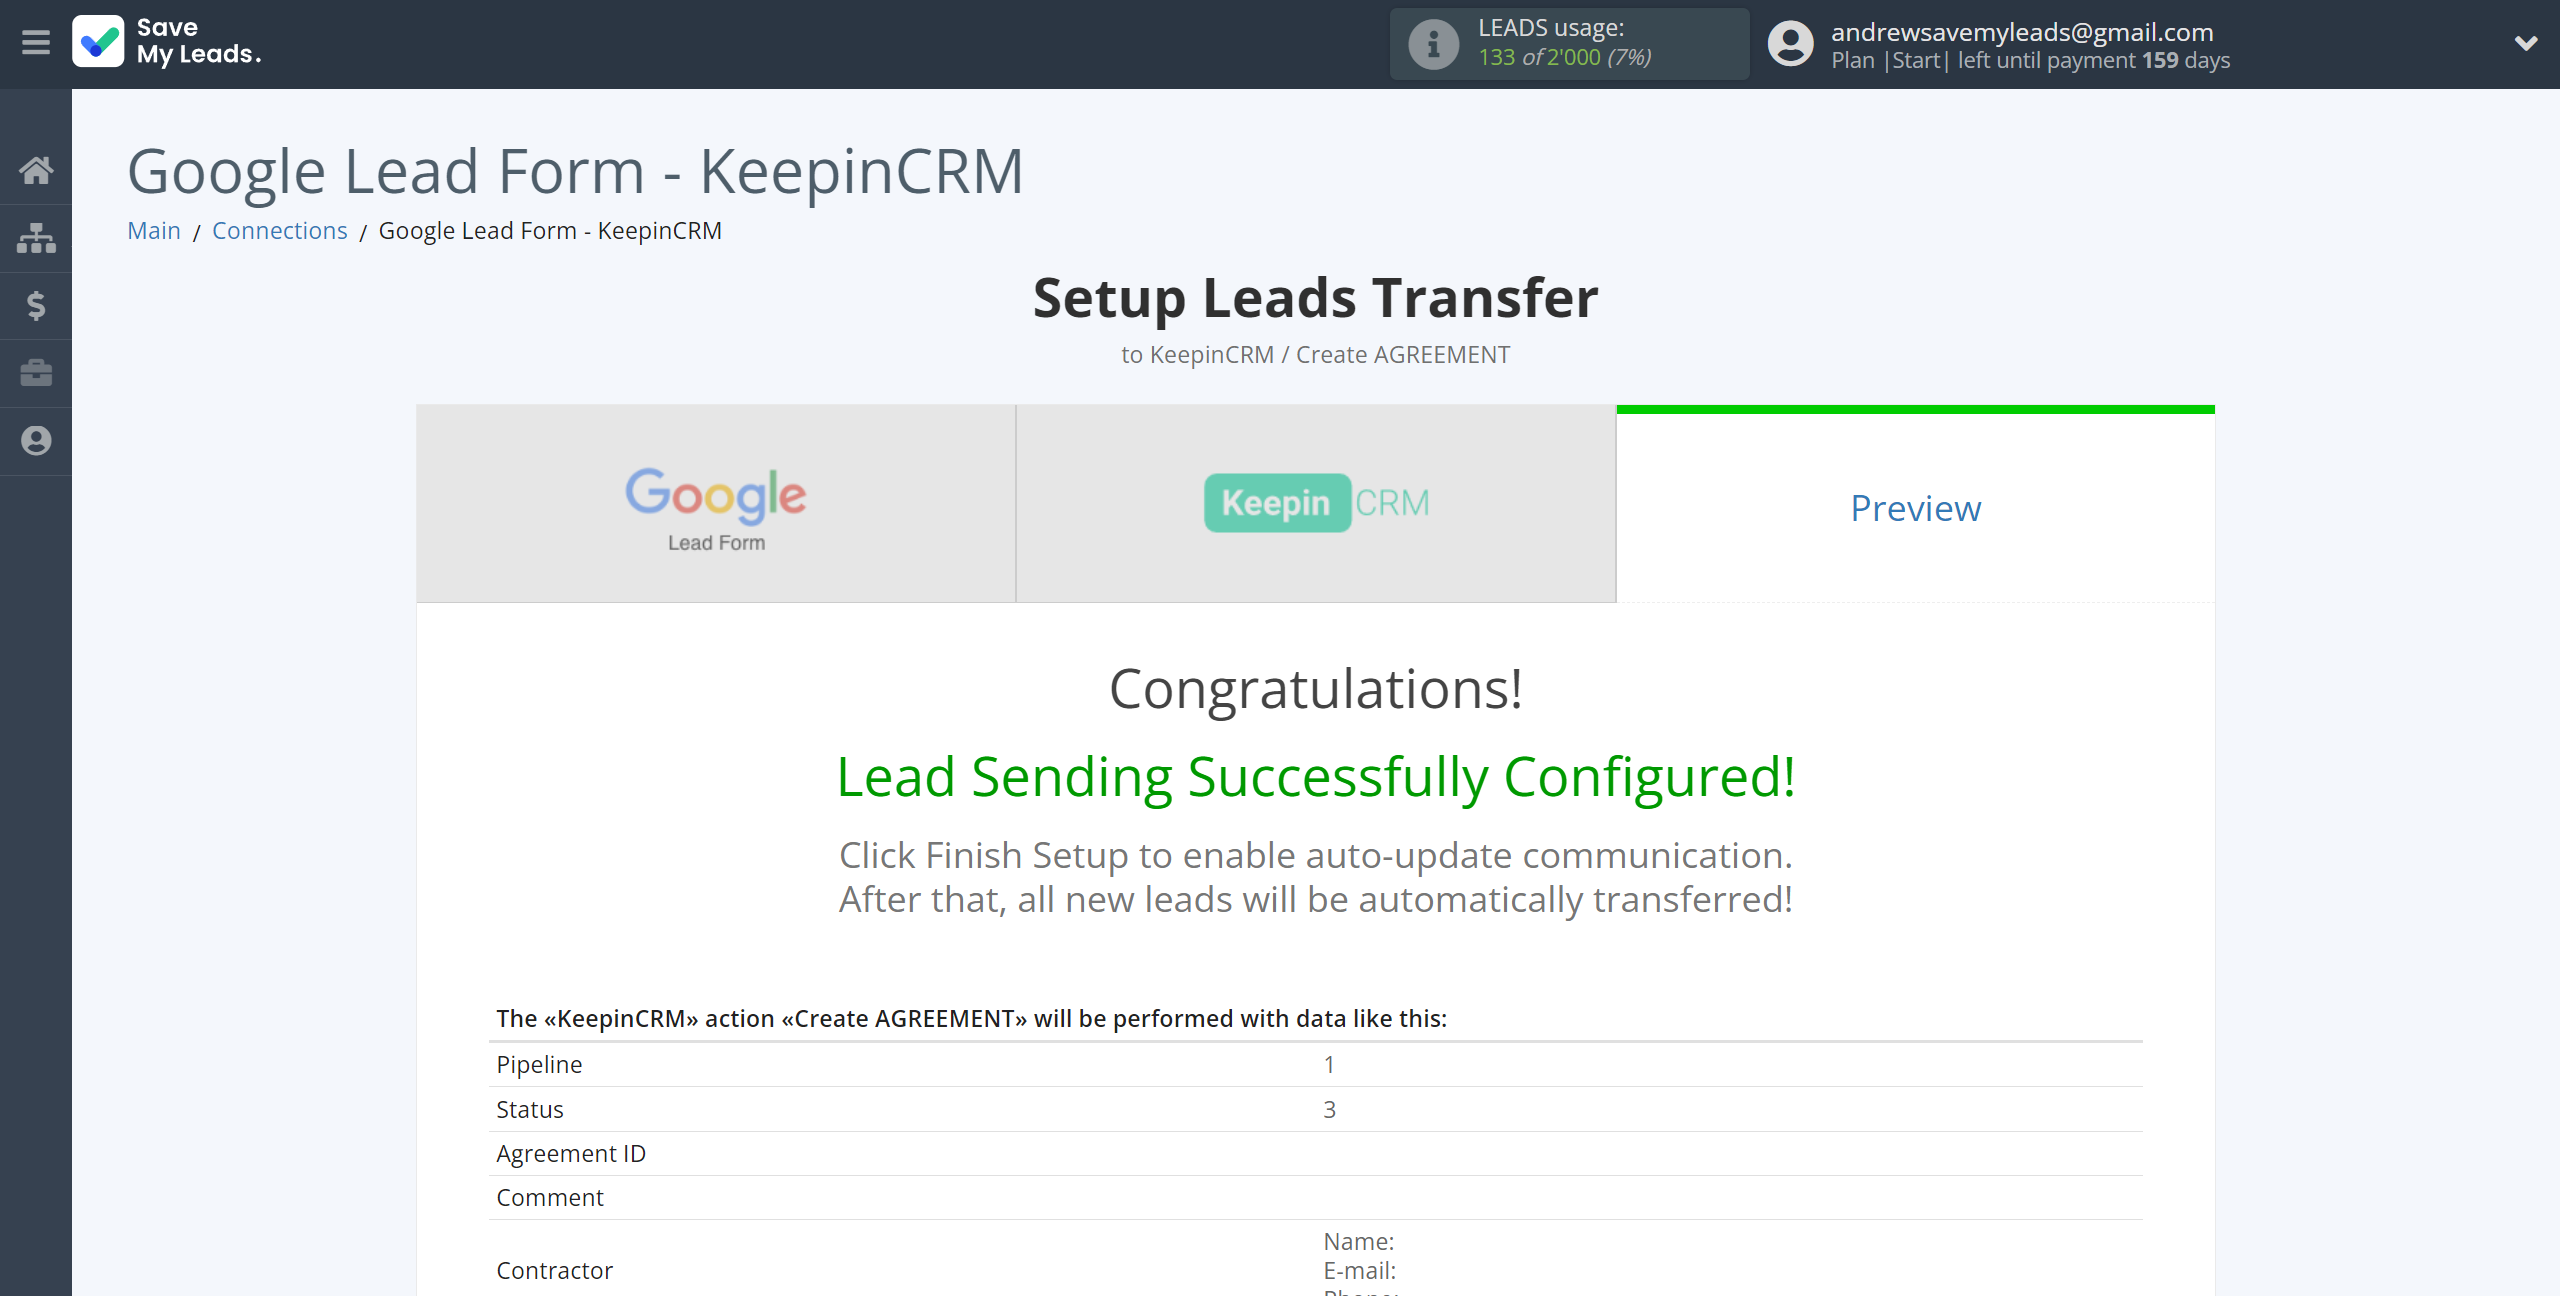 How to Connect Google Lead Form with KeepinCRM Create Agreement | Test data